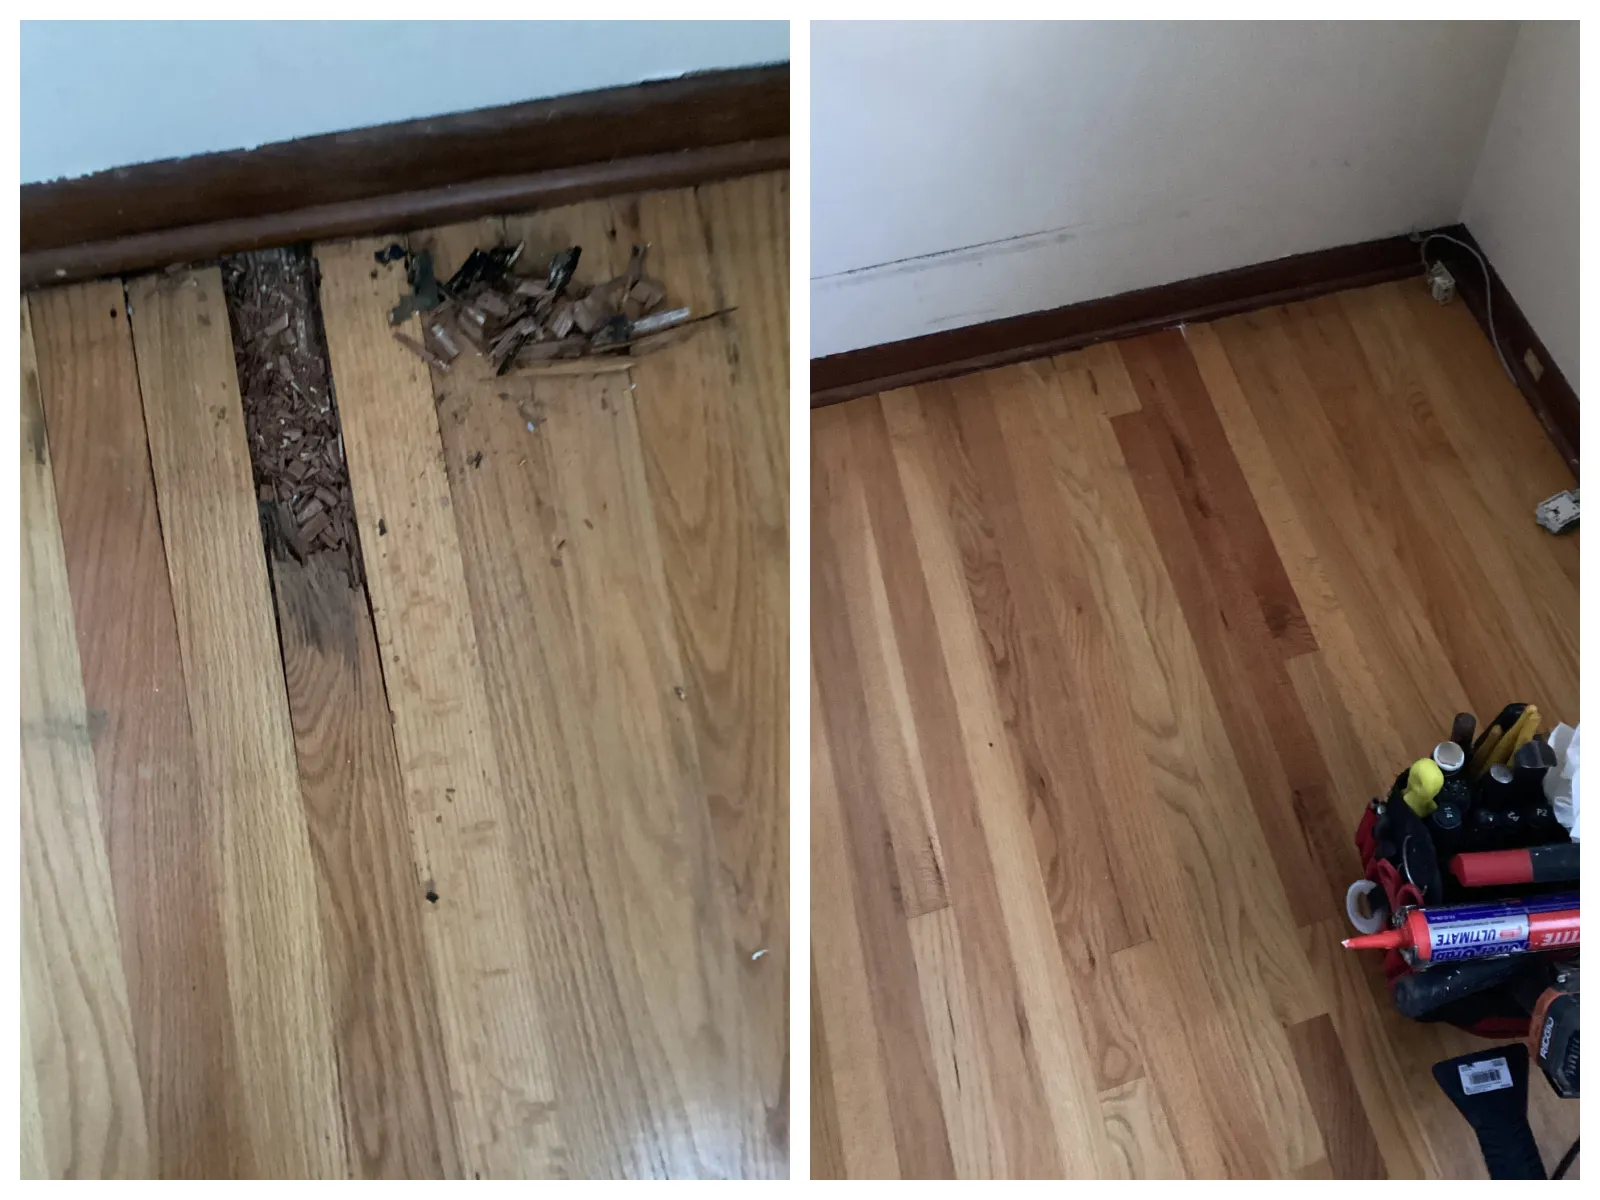 ‘Before’ image shows damaged floor boards suffering from wood rot, discoloration and surface damage. ‘After’ image displays a brand-new floor replacement in Wheaton, IL.